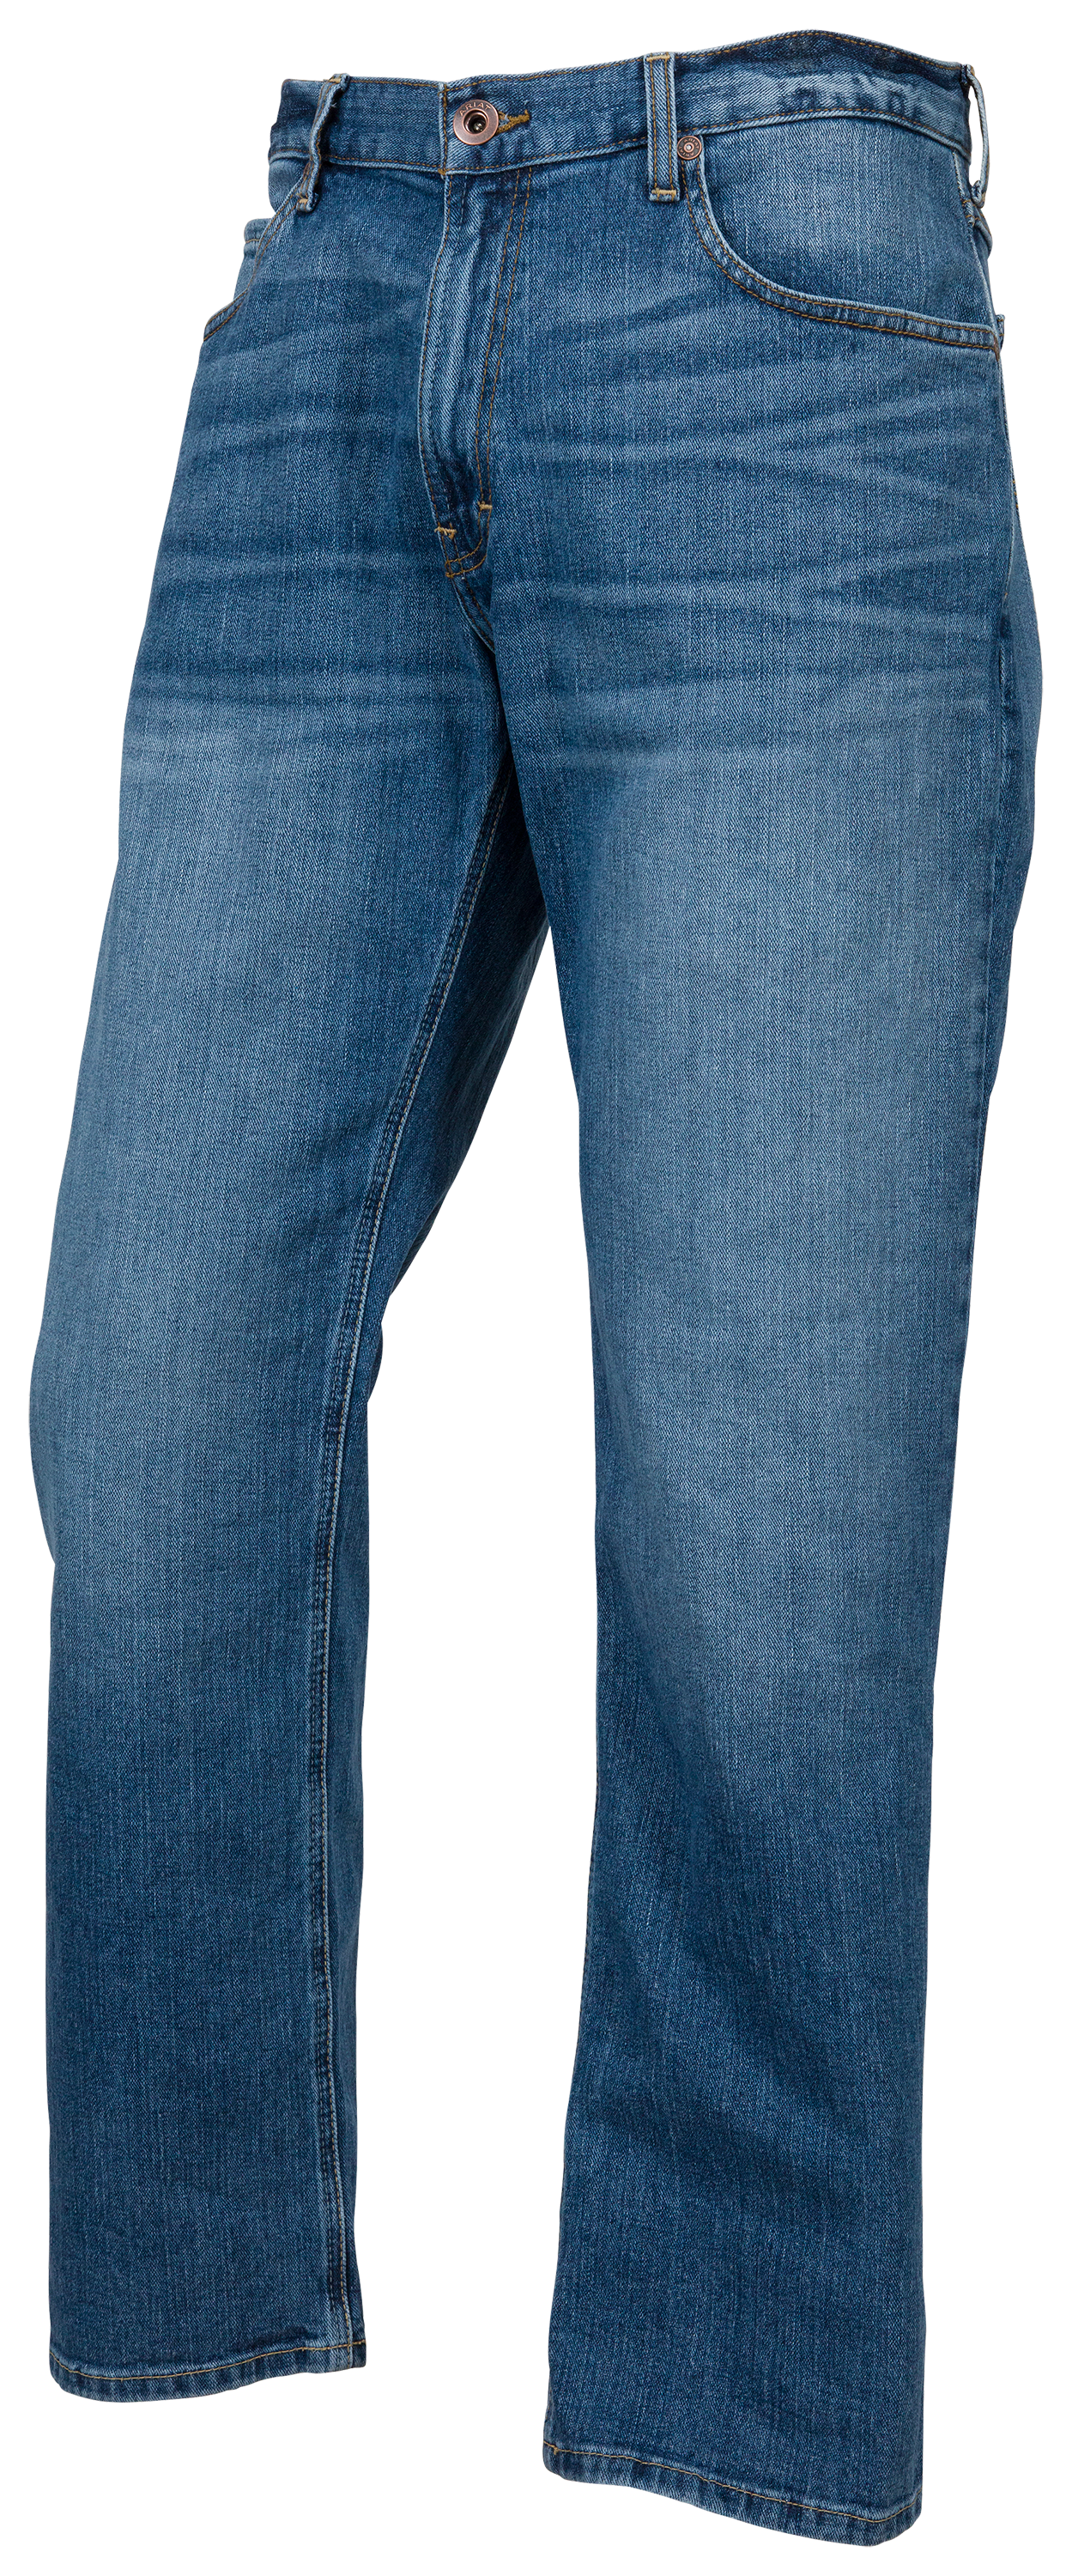 Men's M2 Relaxed Stretch Legacy Boot Cut Jeans in Brandon, Size: 29 X 32 by  Ariat